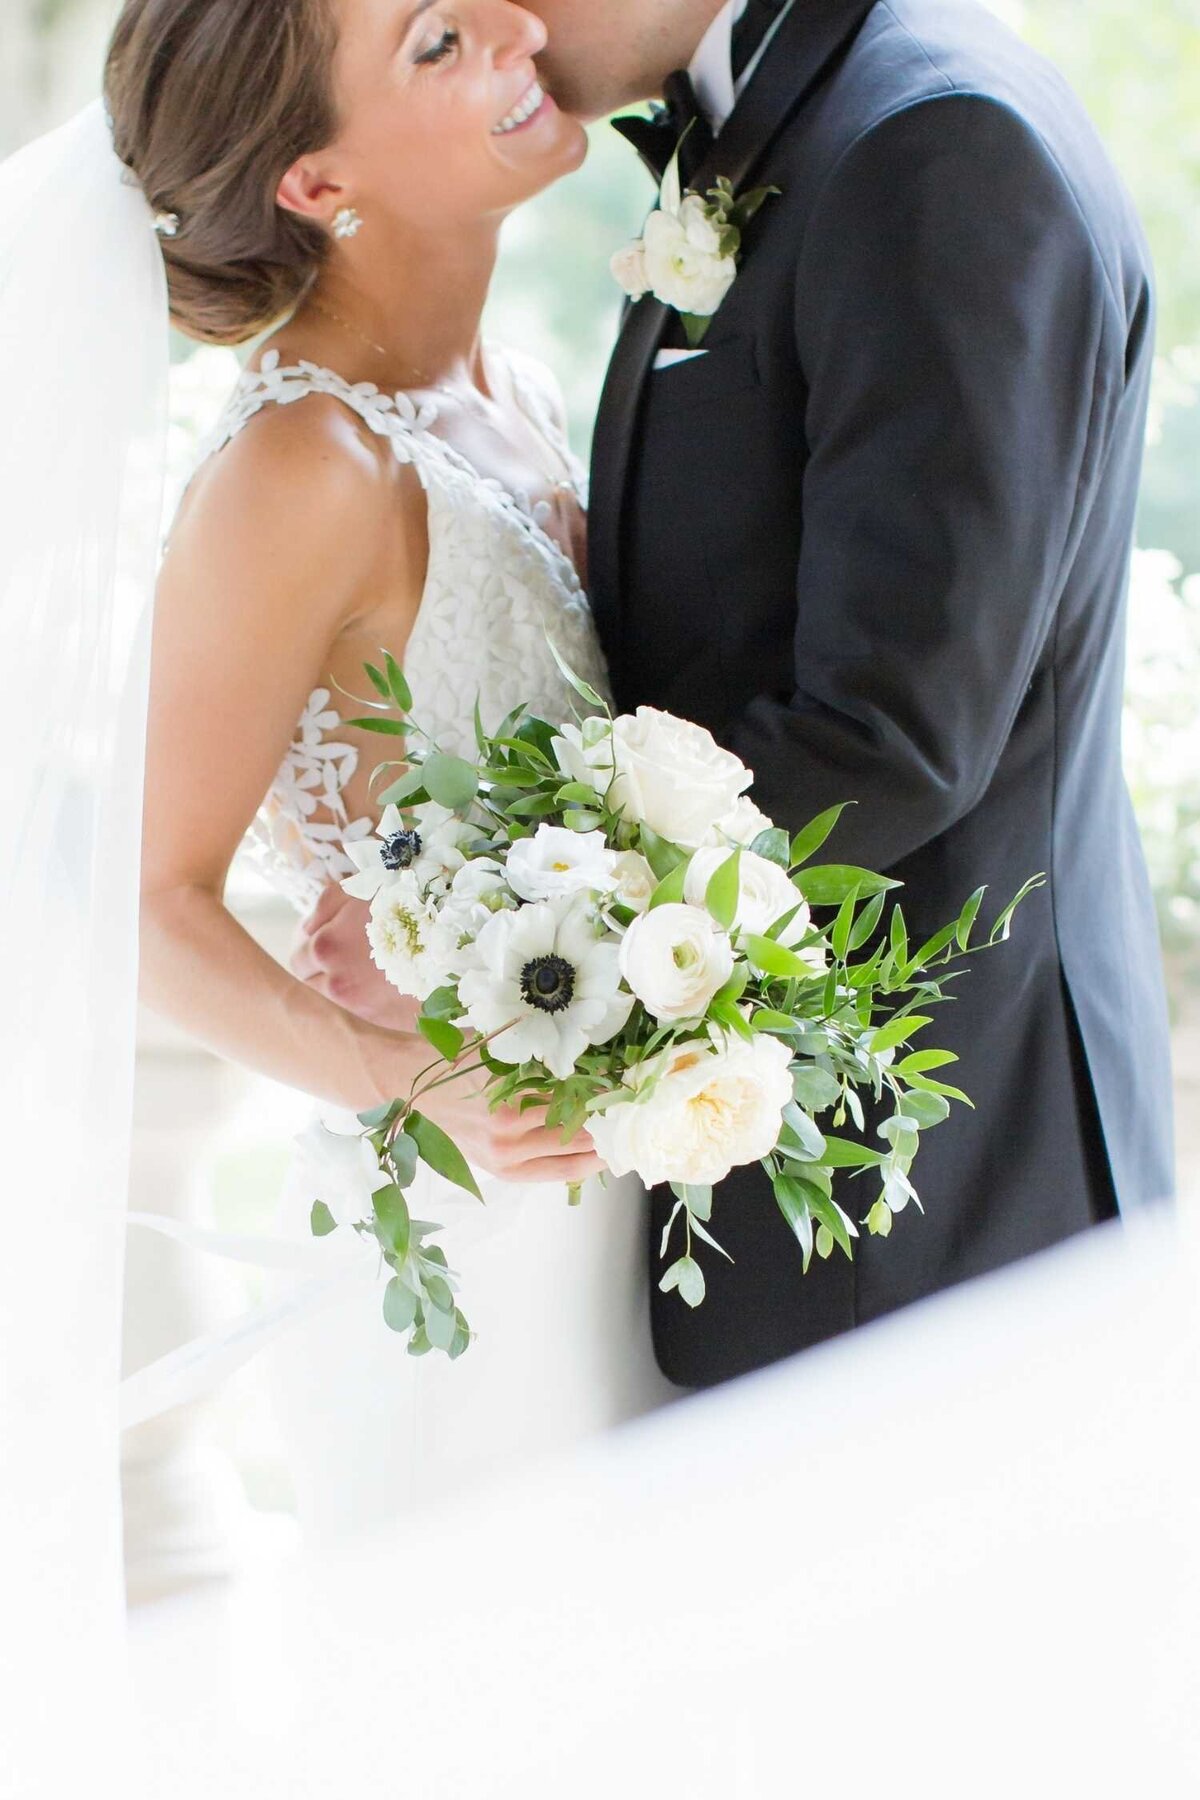 Bride and groom photo with bride's lush garden style bouquet with white and green flowers for a Luxury Chicago Outdoor Historic Wedding Venue.